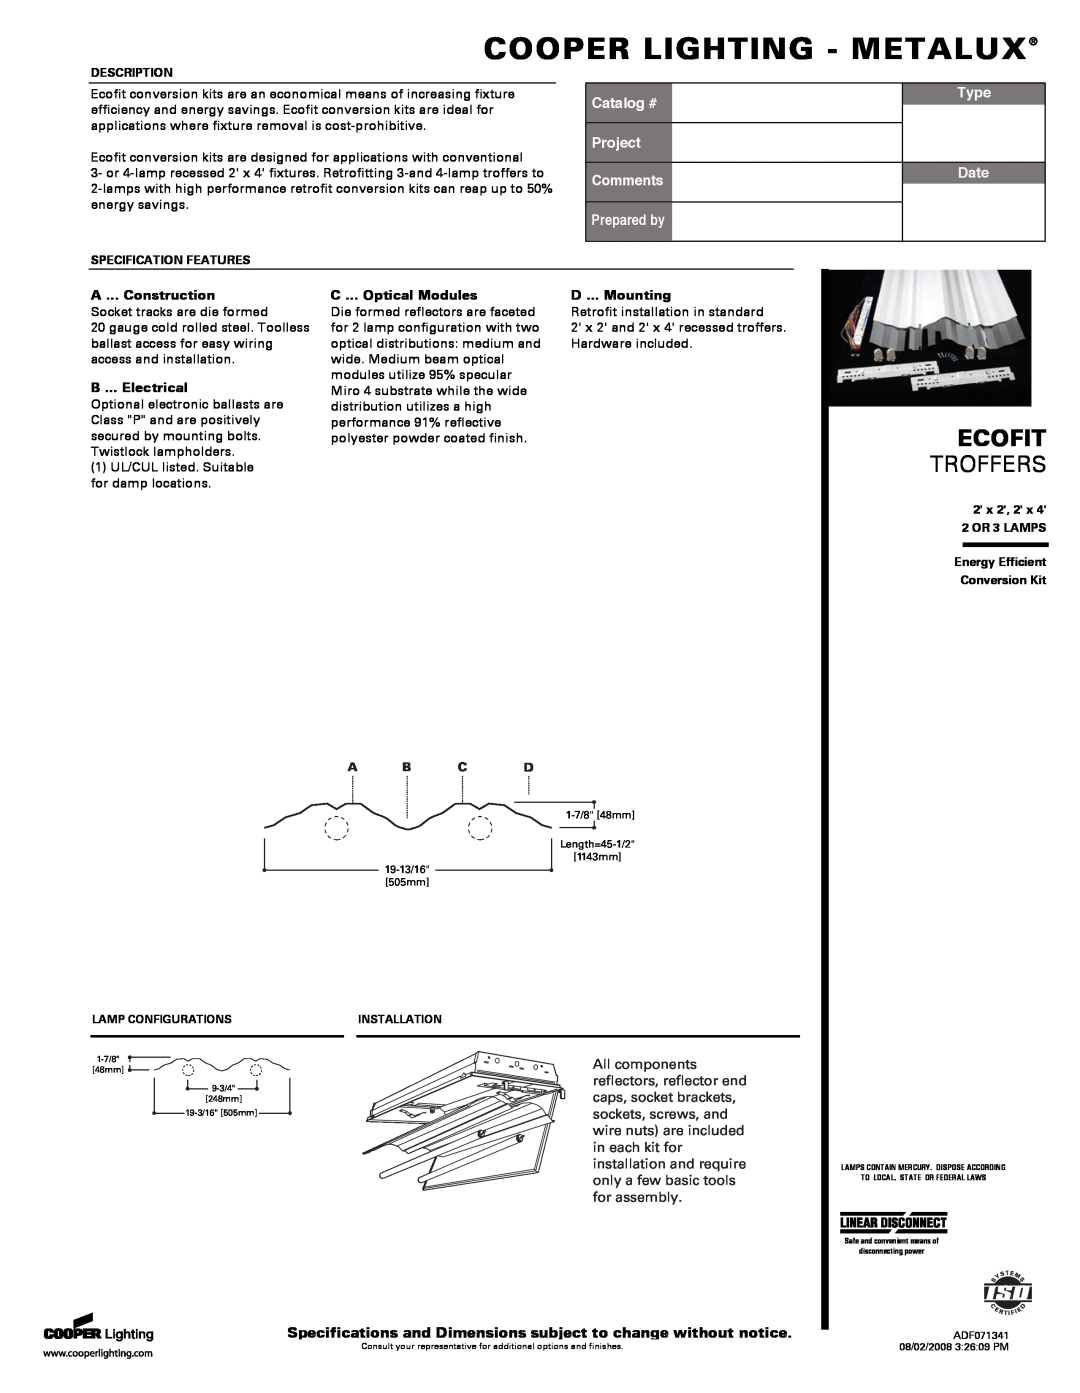 Cooper Lighting P4P8X specifications Cooper Lighting - Metalux, Ecofit, Troffers, Catalog #, Project Comments, Prepared by 